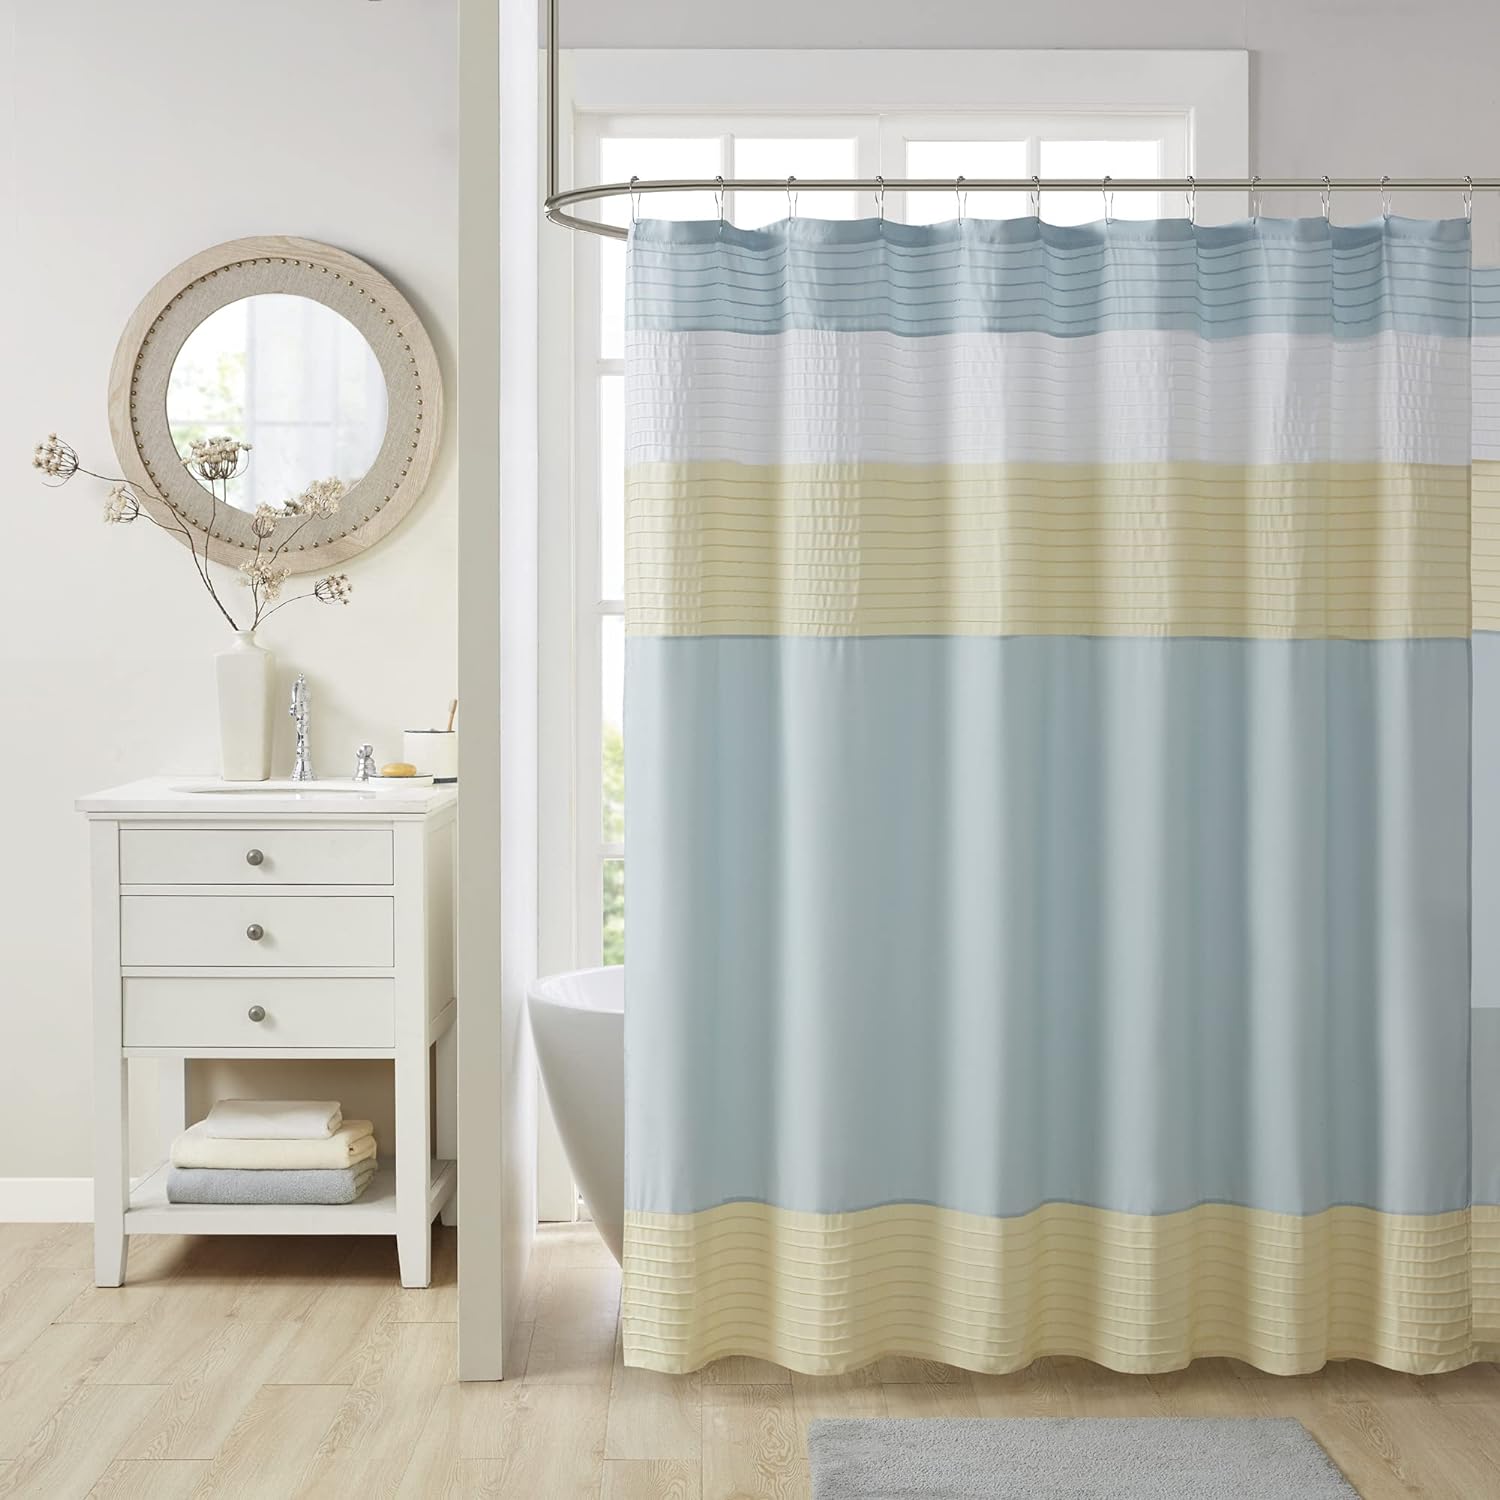 Was light and drapes nicely- see as easy to throw in washer and dryer. Pretty light colors, any of which could be used to accent your bathroom. The stitching makes it unique and adds interest. Well made, easy to hang. Vey happy with!